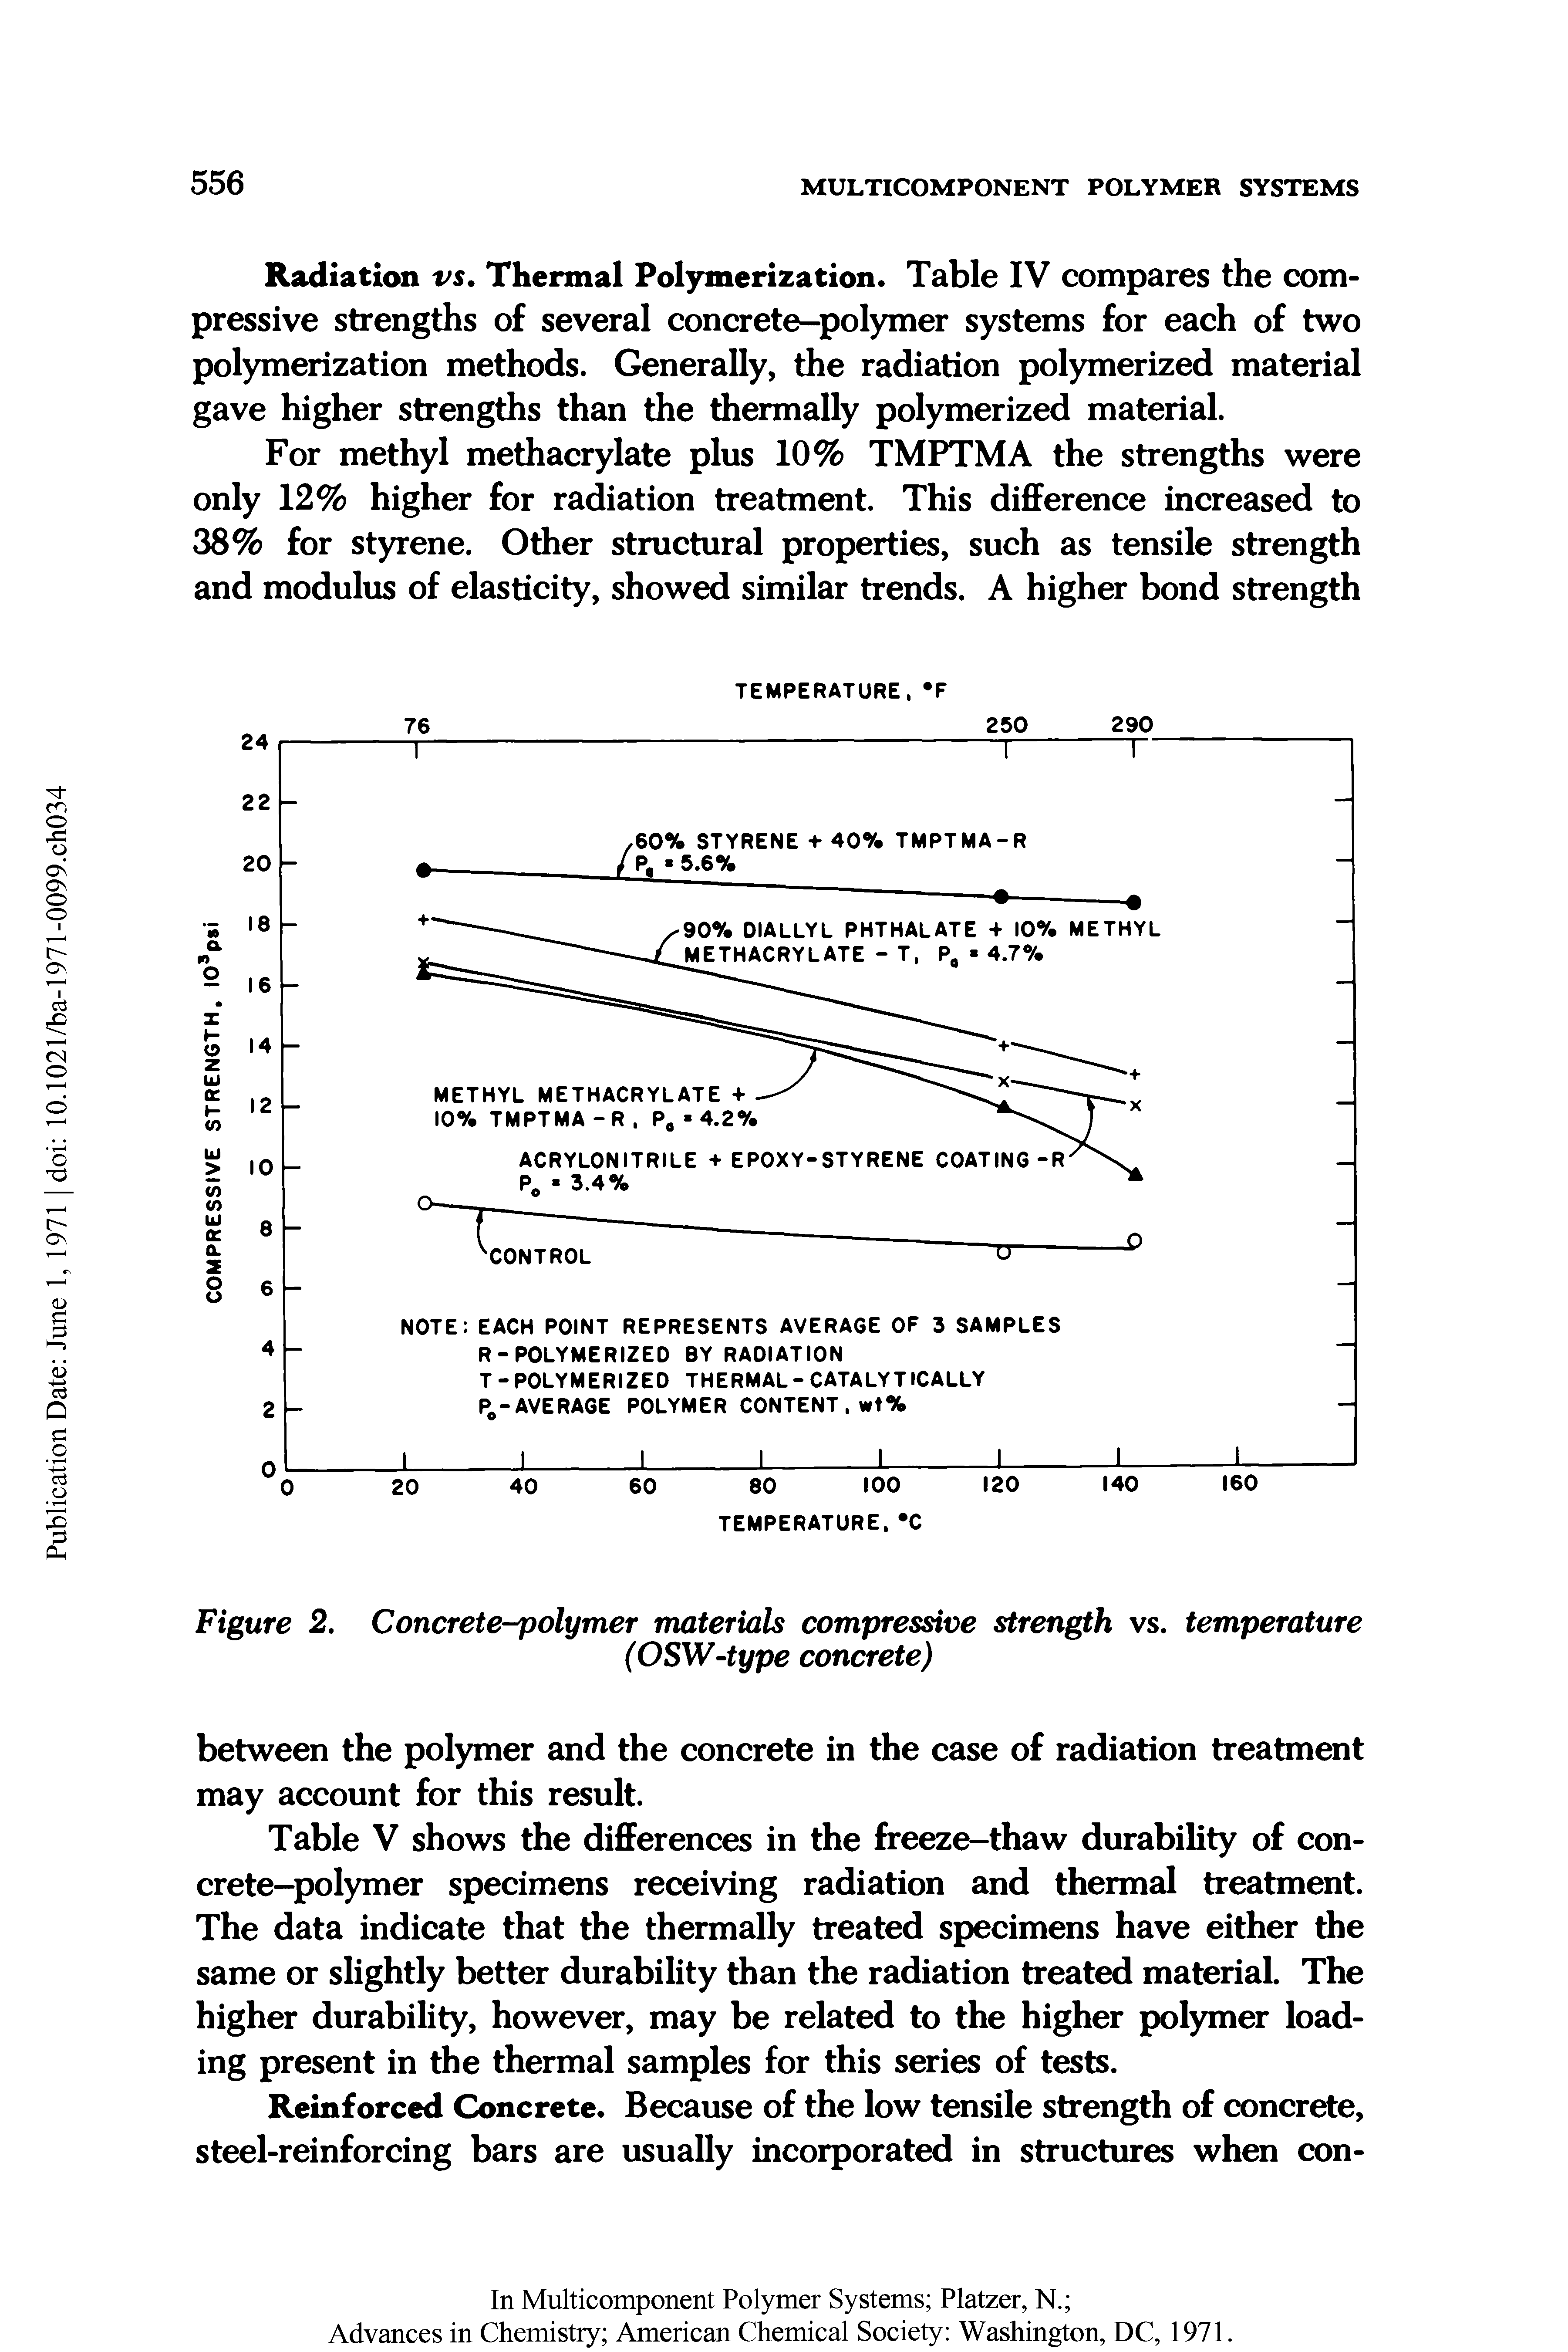 Table V shows the differences in the freeze-thaw durability of concrete-polymer specimens receiving radiation and thermal treatment. The data indicate that the thermally treated specimens have either the same or slightly better durability than the radiation treated material. The higher durability, however, may be related to the higher polymer loading present in the thermal samples for this series of tests.